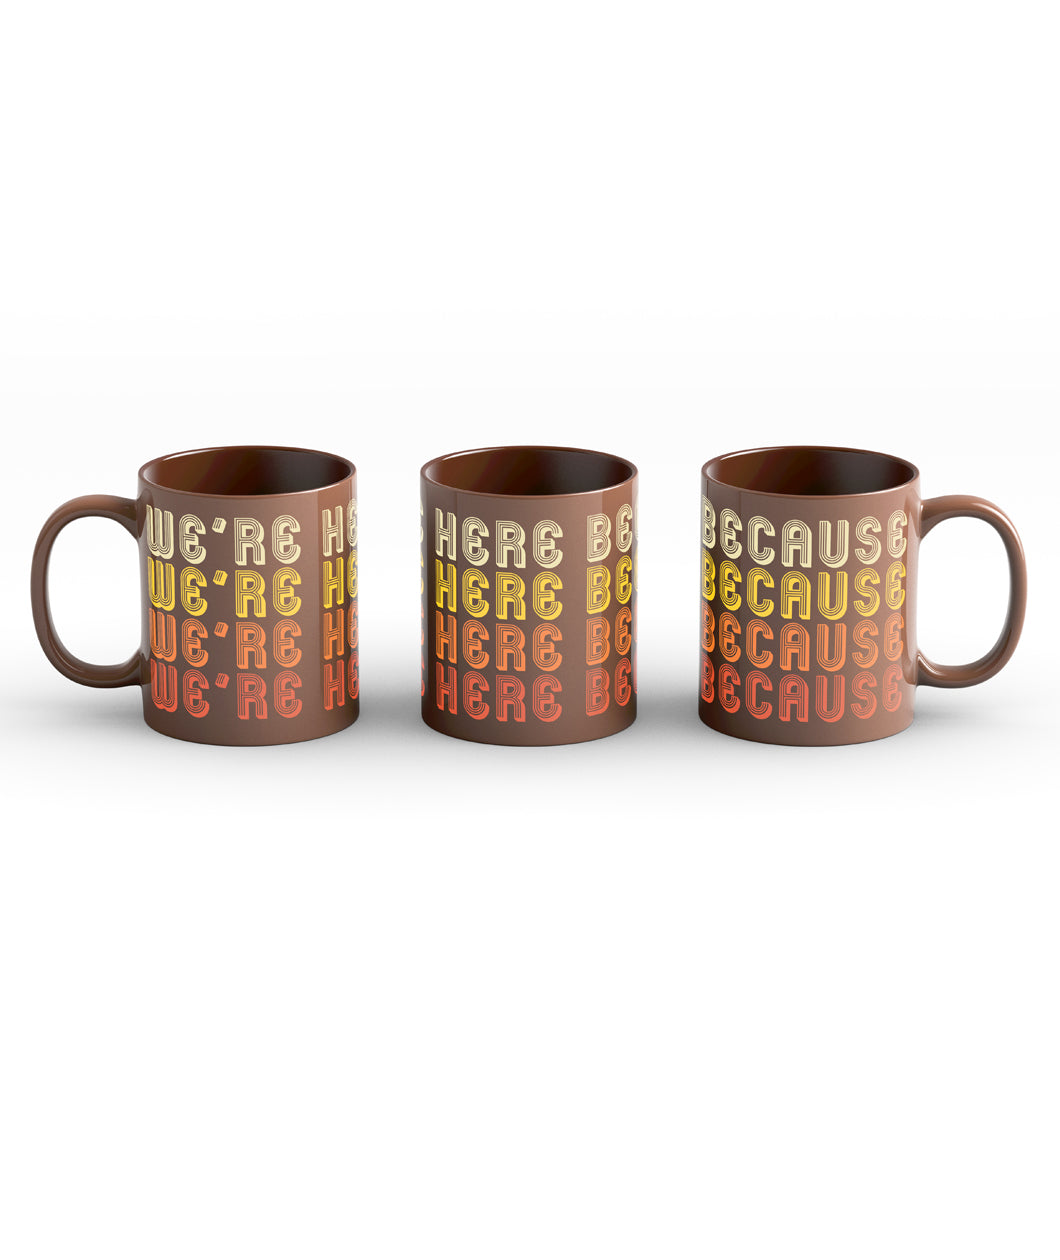 Brown Mug with a full wrap design. Design is of lettering saying, "We're Here Because" repeated four time in 70's style lettering. Lettering color is an off white for the first line, yellow for the second line, orange for the third line, and red for the fourth line. 